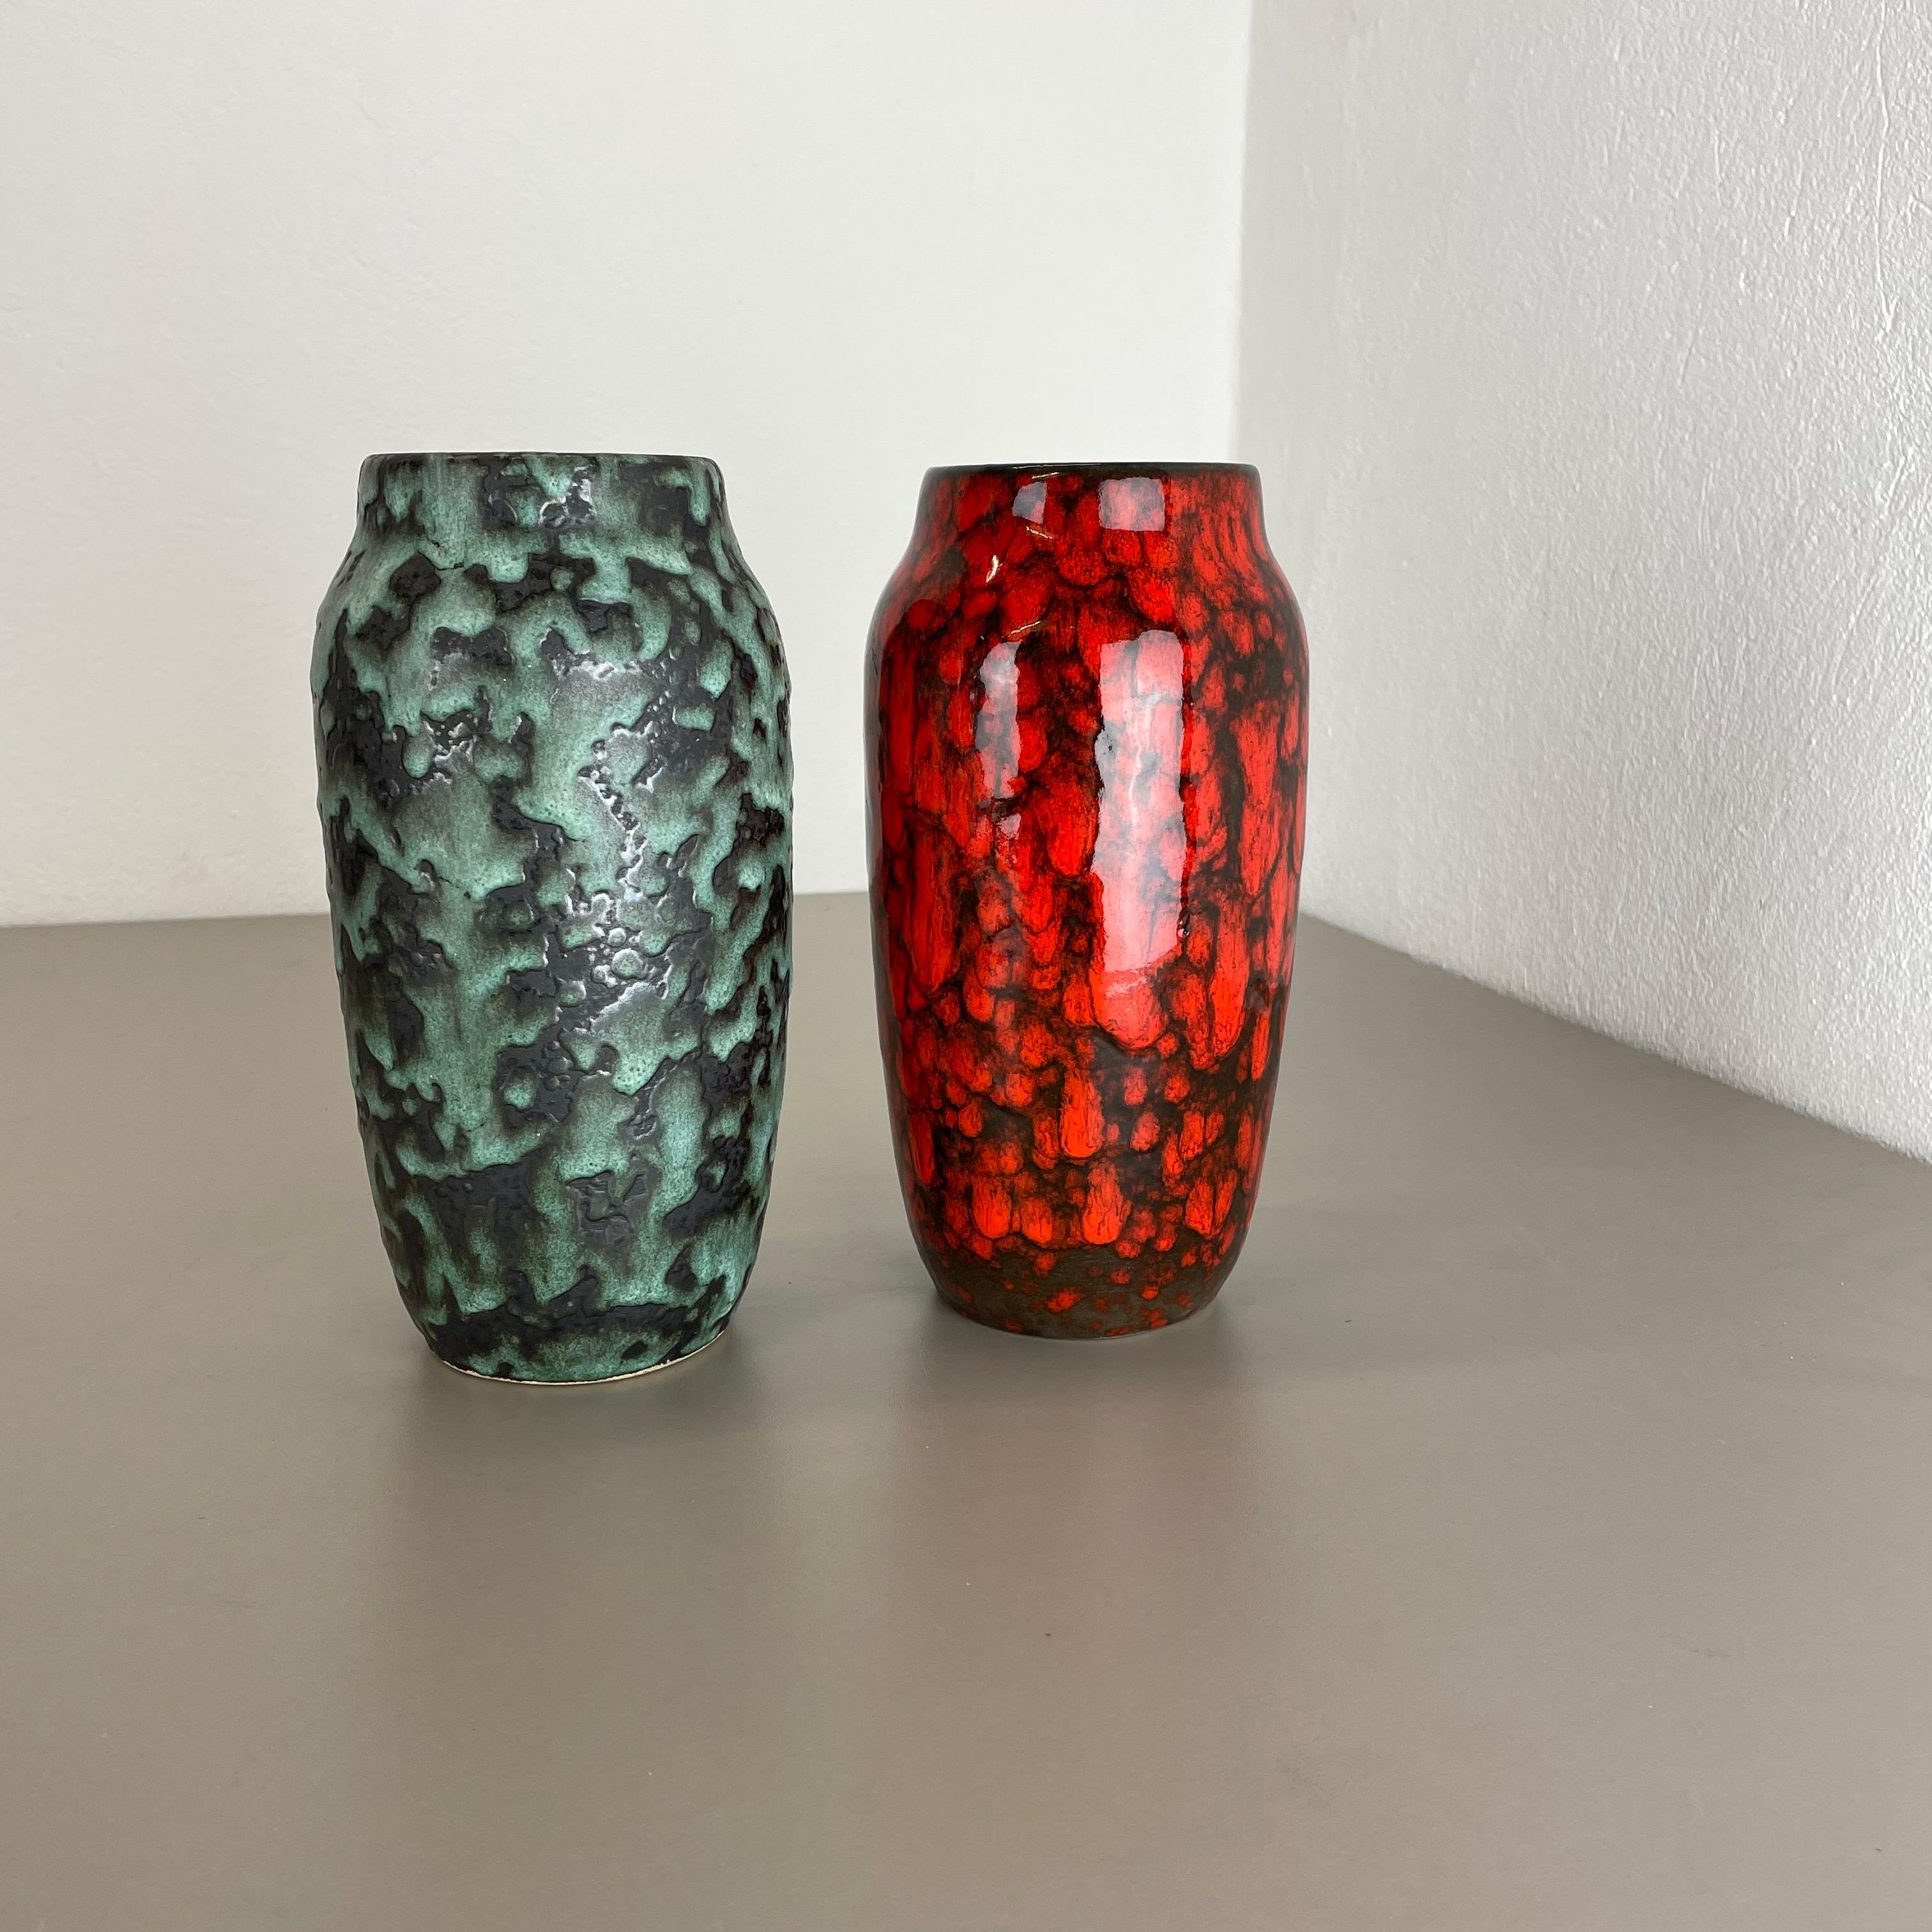 Ceramic Set of 2 Rare Super Color Crusty Fat Lava Vases by Scheurich, Germany WGP, 1970s For Sale